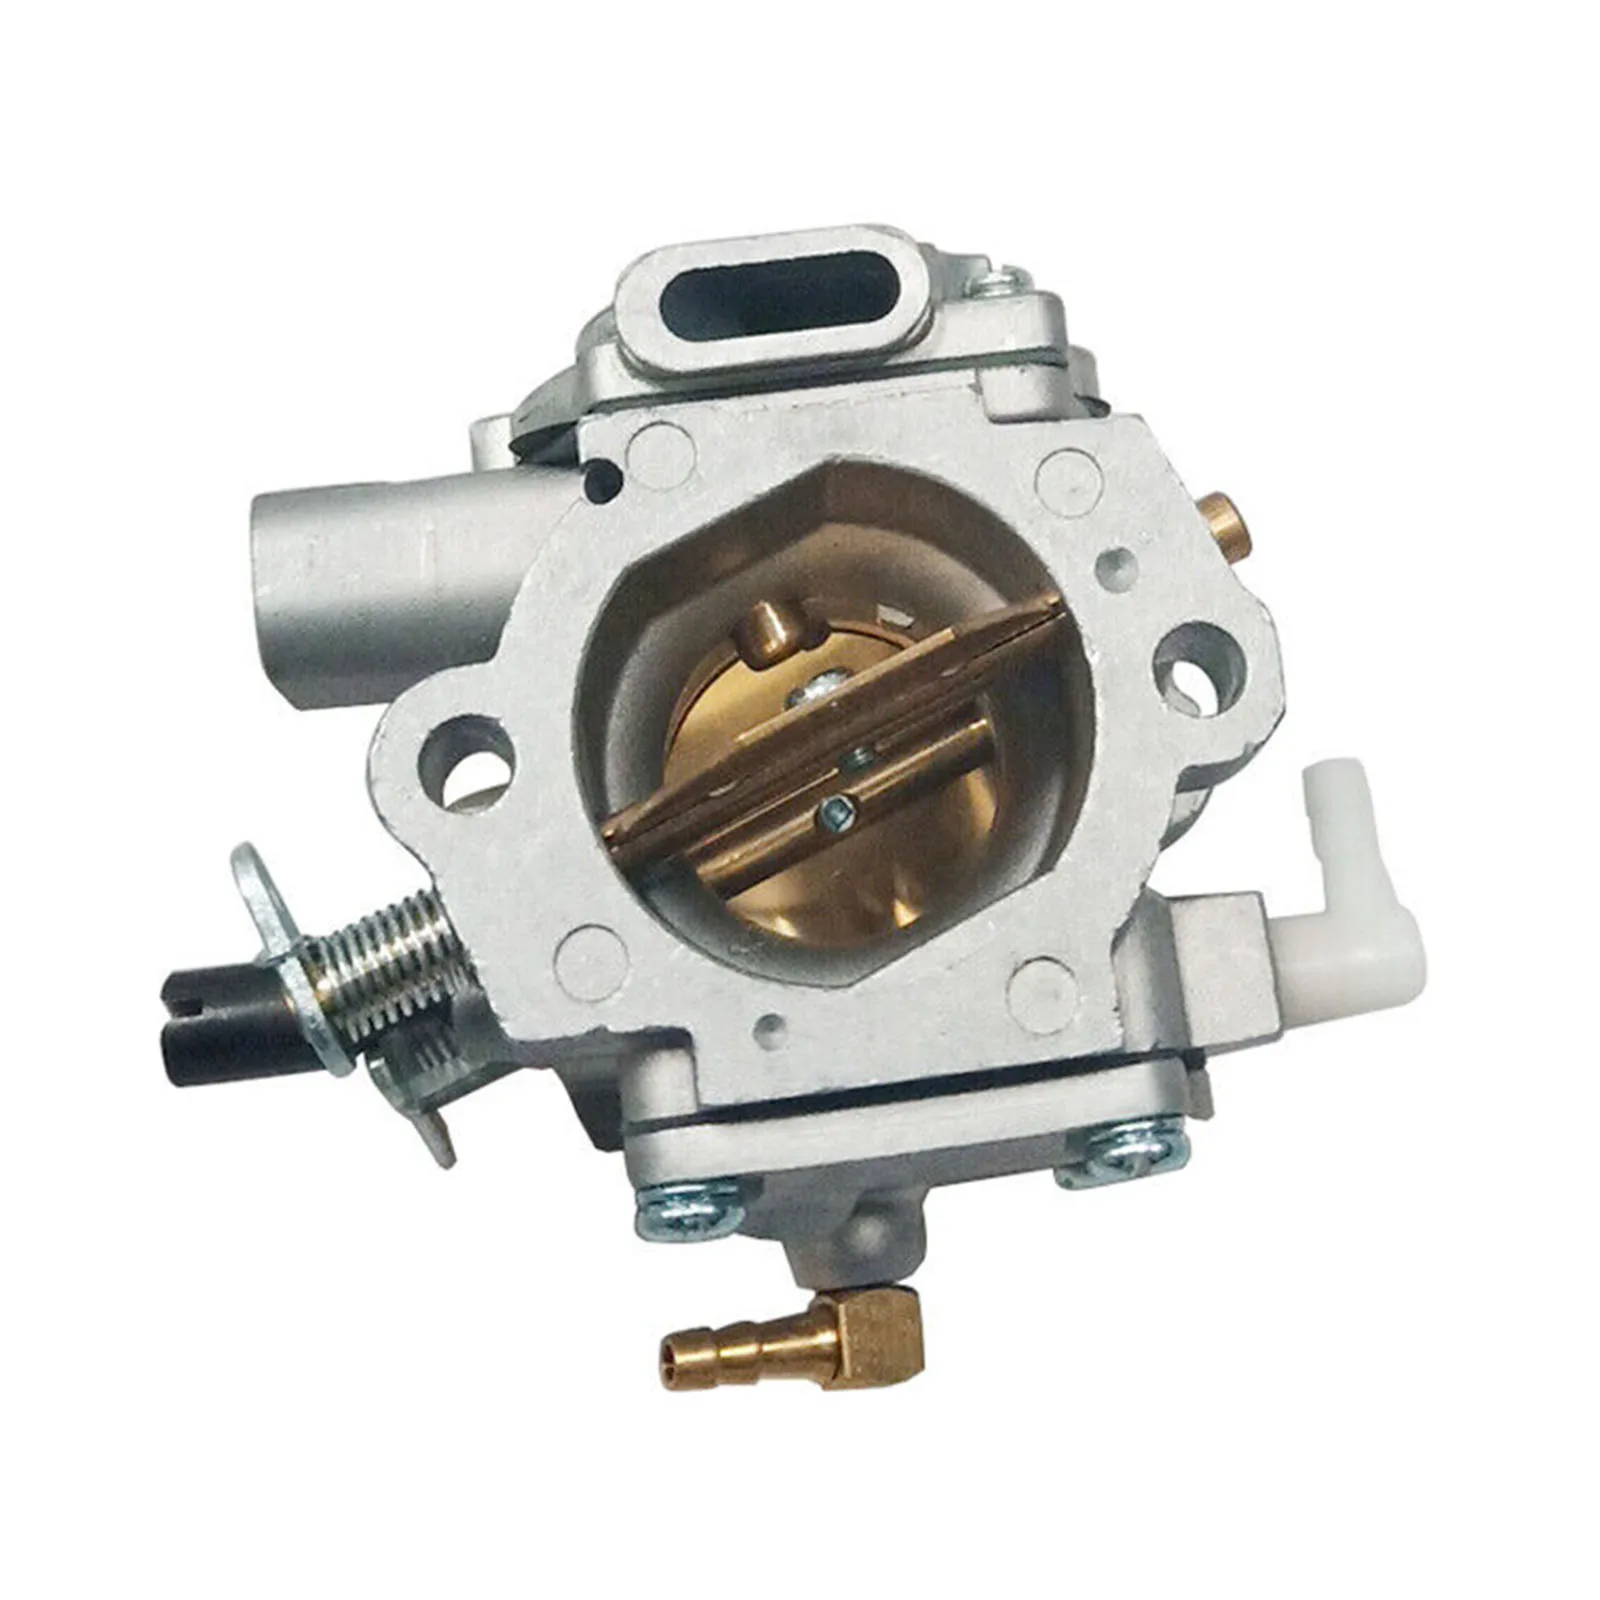 

Carburetor HT-12E For Stihl MS880 088 084 Chainsaw 1124 120 0609 MS880 Chainsaws Home Garden Spare Parts Power Tool Accessories